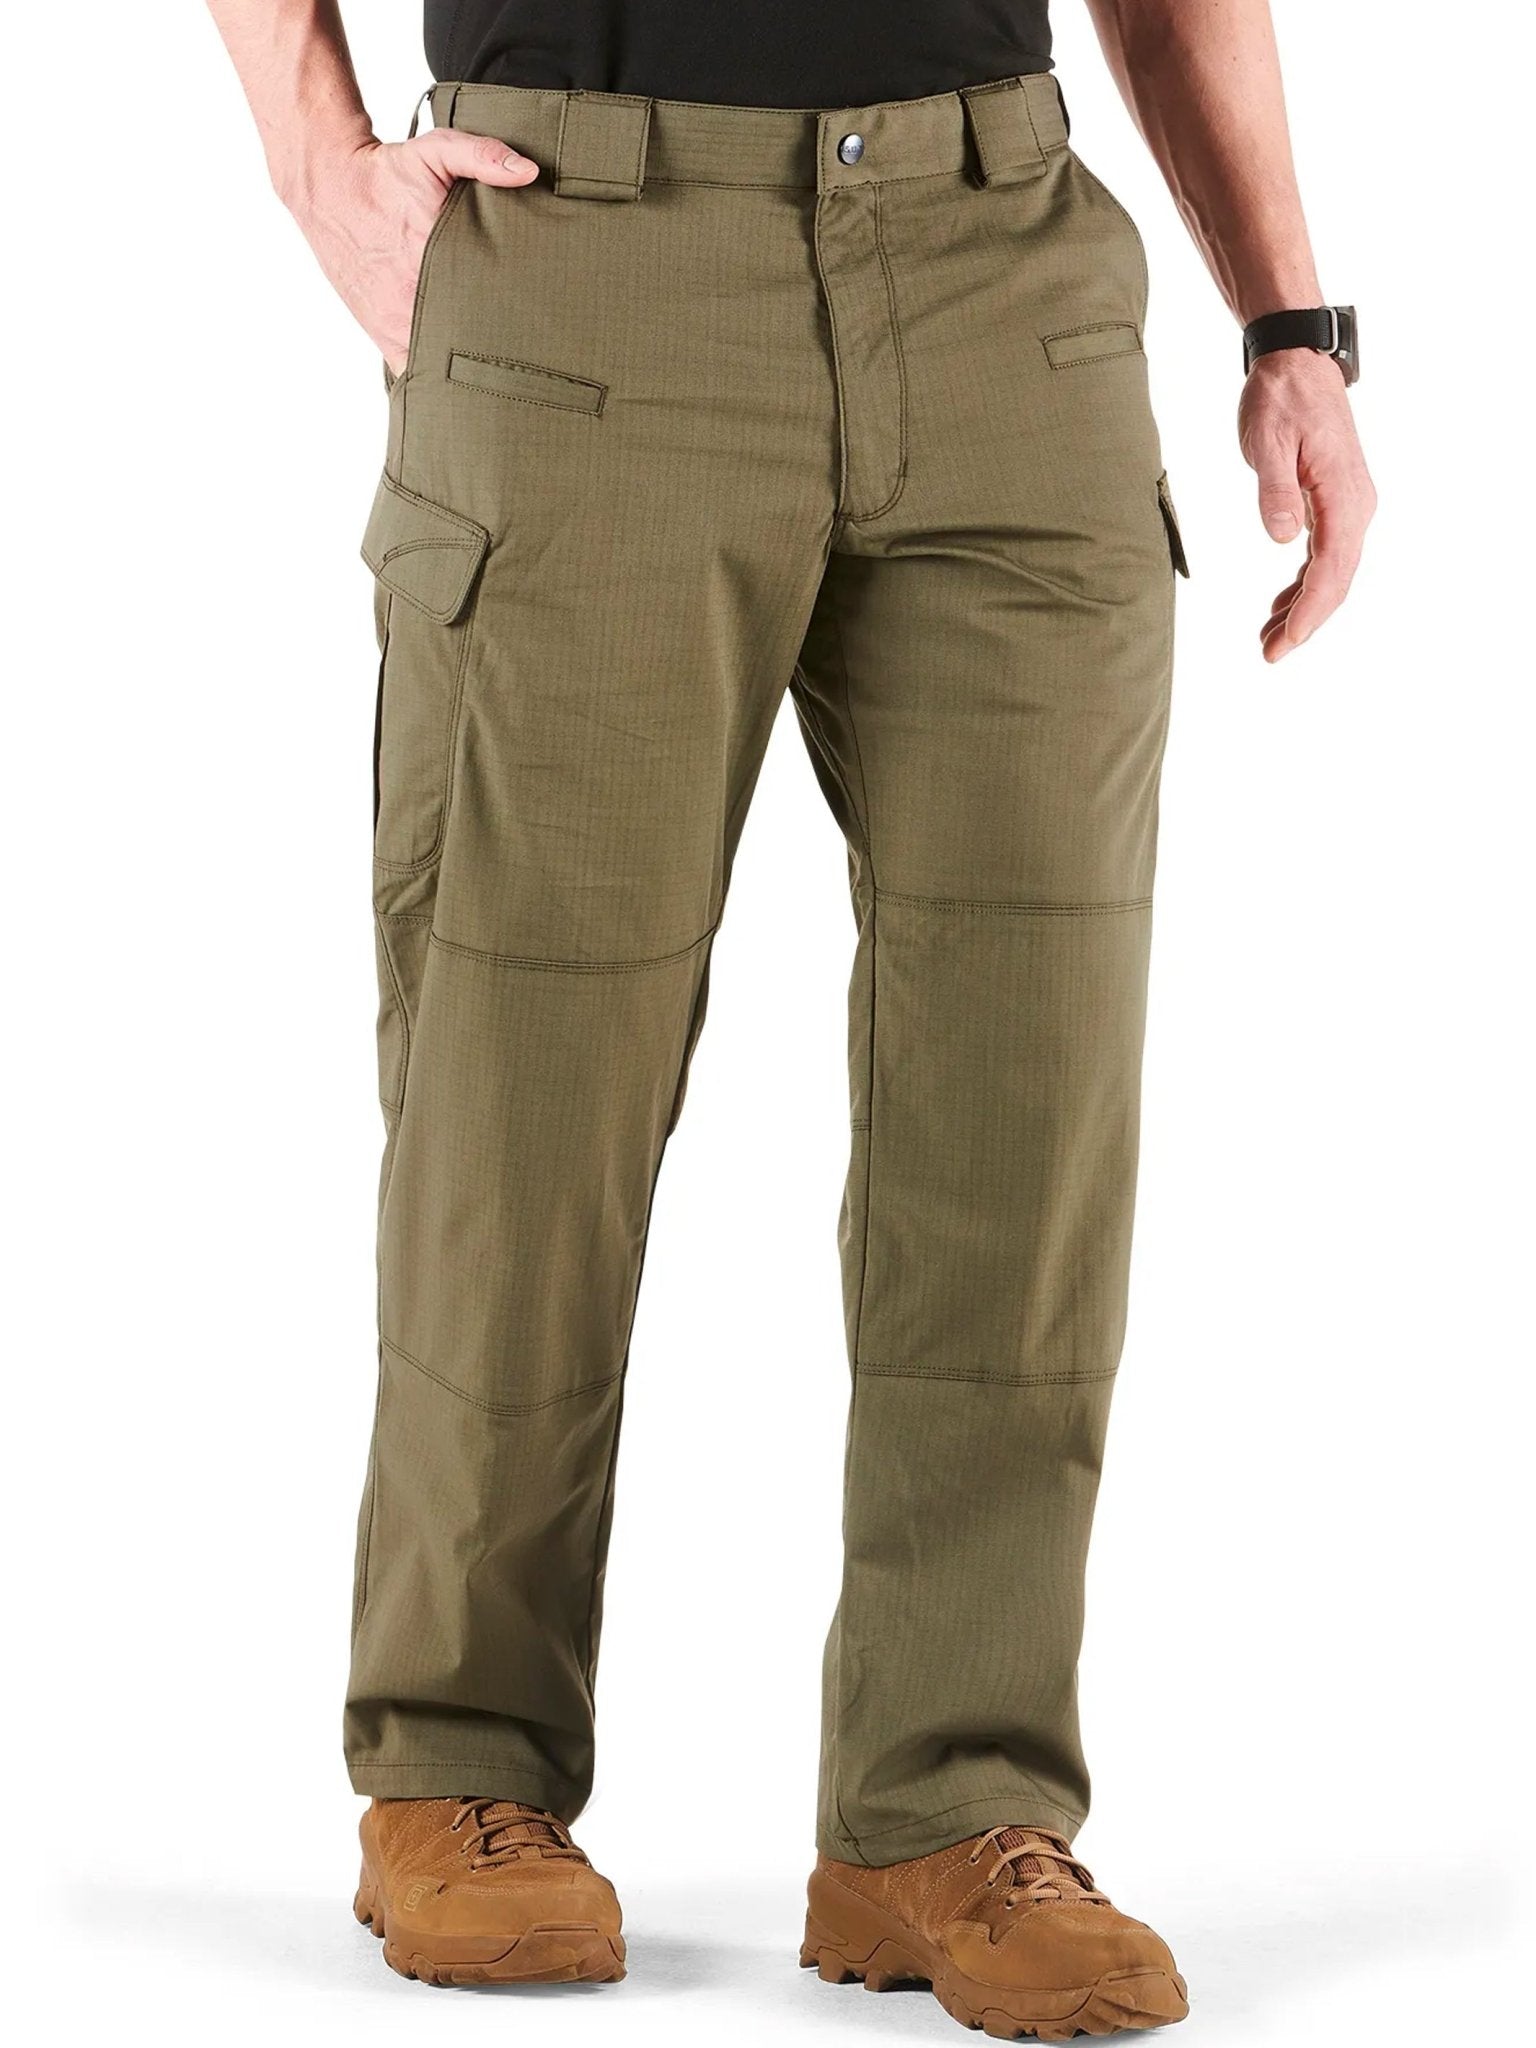 4elementsclothing5.11 Tactical5.11 Tactical - 5.11 STRYKE® PANT - Mens Stryke trouser Ripstop, Teflon finished, knee pocket - Style 74369Trousers & Jeans74369-186-30Wx30L